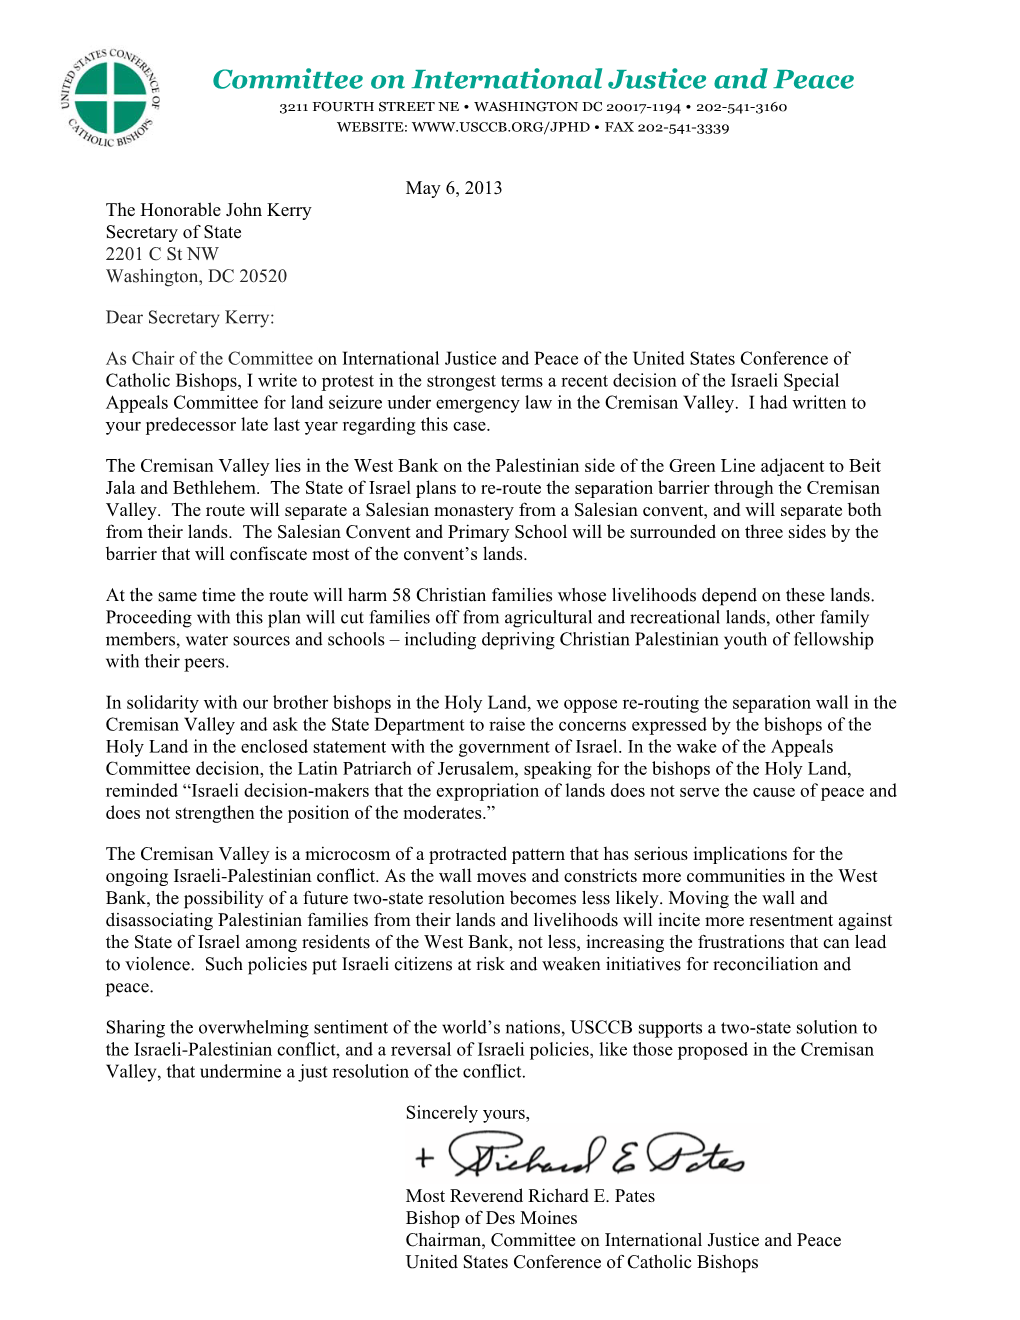 Letter to Secretary of State Kerry on Cremisan Valley in the Holy Land